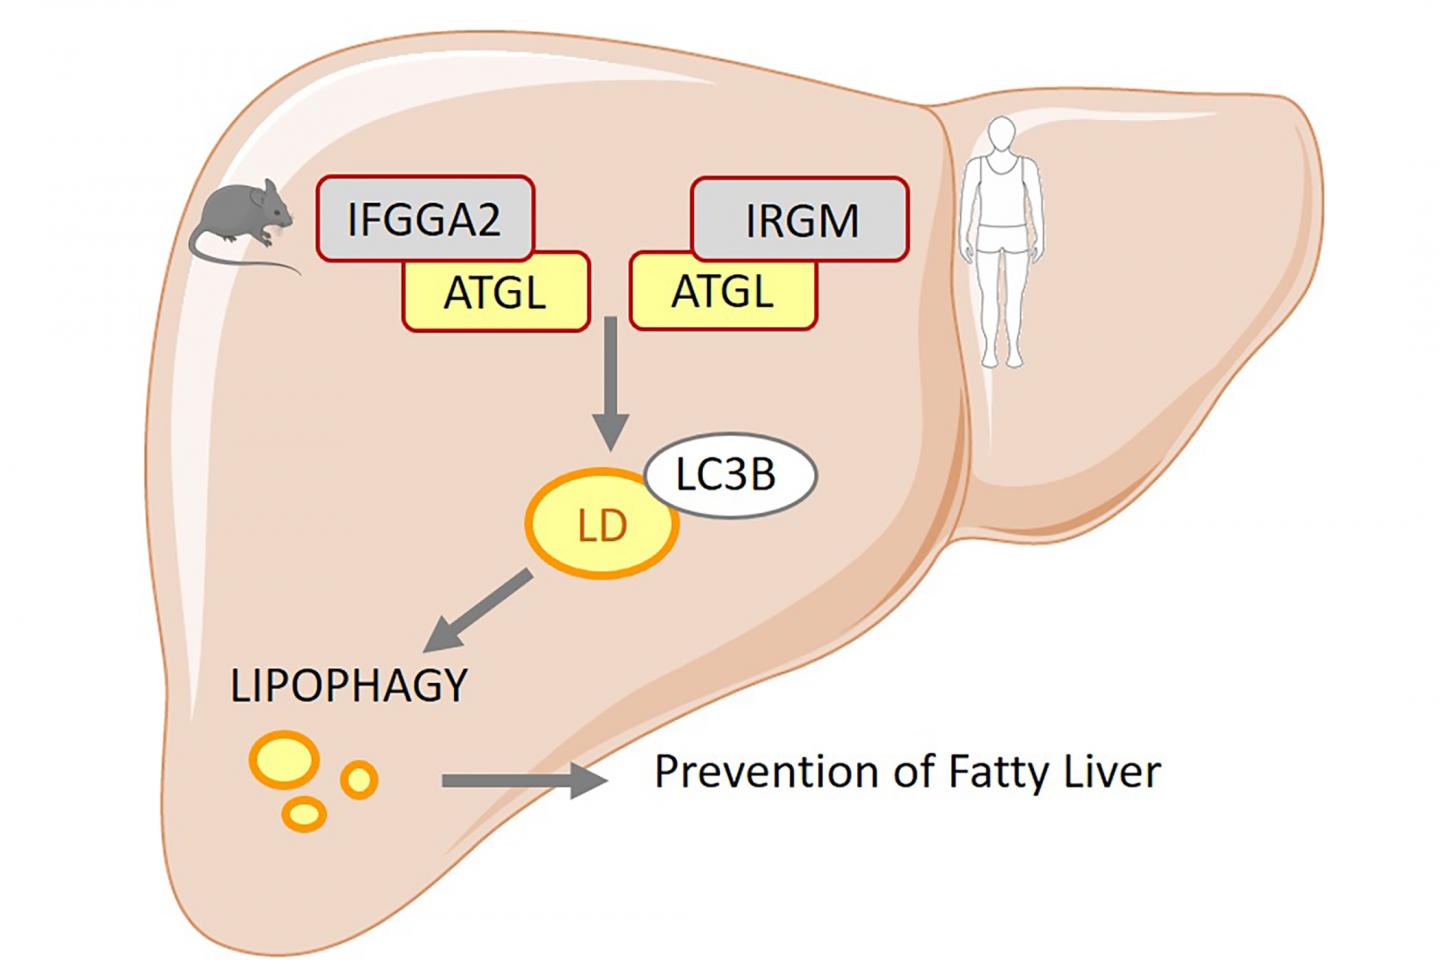 Additional Genetic Cause for Non-alcoholic Fatty Liver Disease Discovered